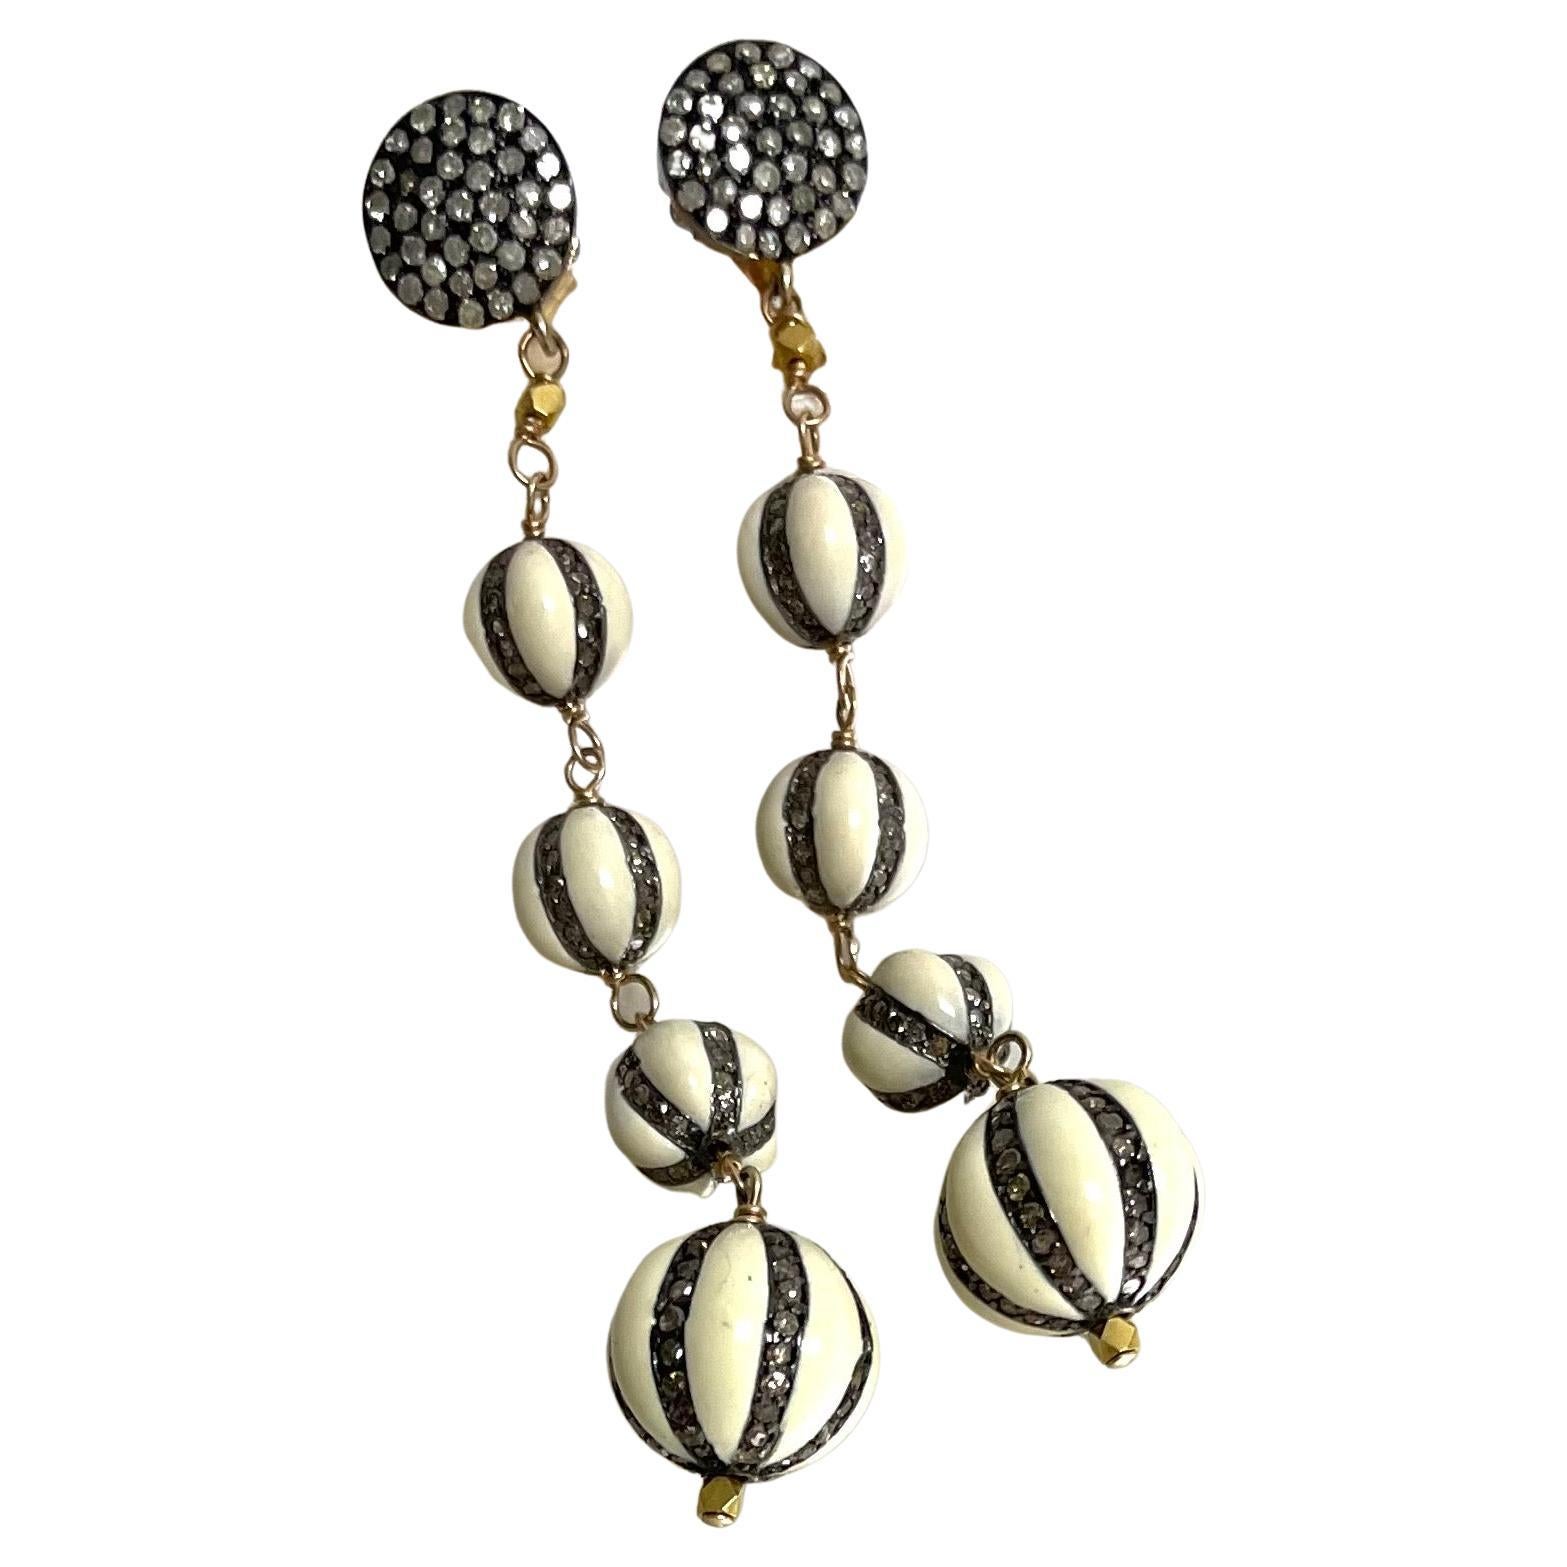 Description
Whimsical enamel and pave diamond melon ball design earrings.
Item # E3008

Materials and Weight
Ivory color Enamel 8 and 12.5mm, round shape
Pave diamonds 
18k yellow gold faceted beads
Rhodium sterling silver
14k posts and jumbo back